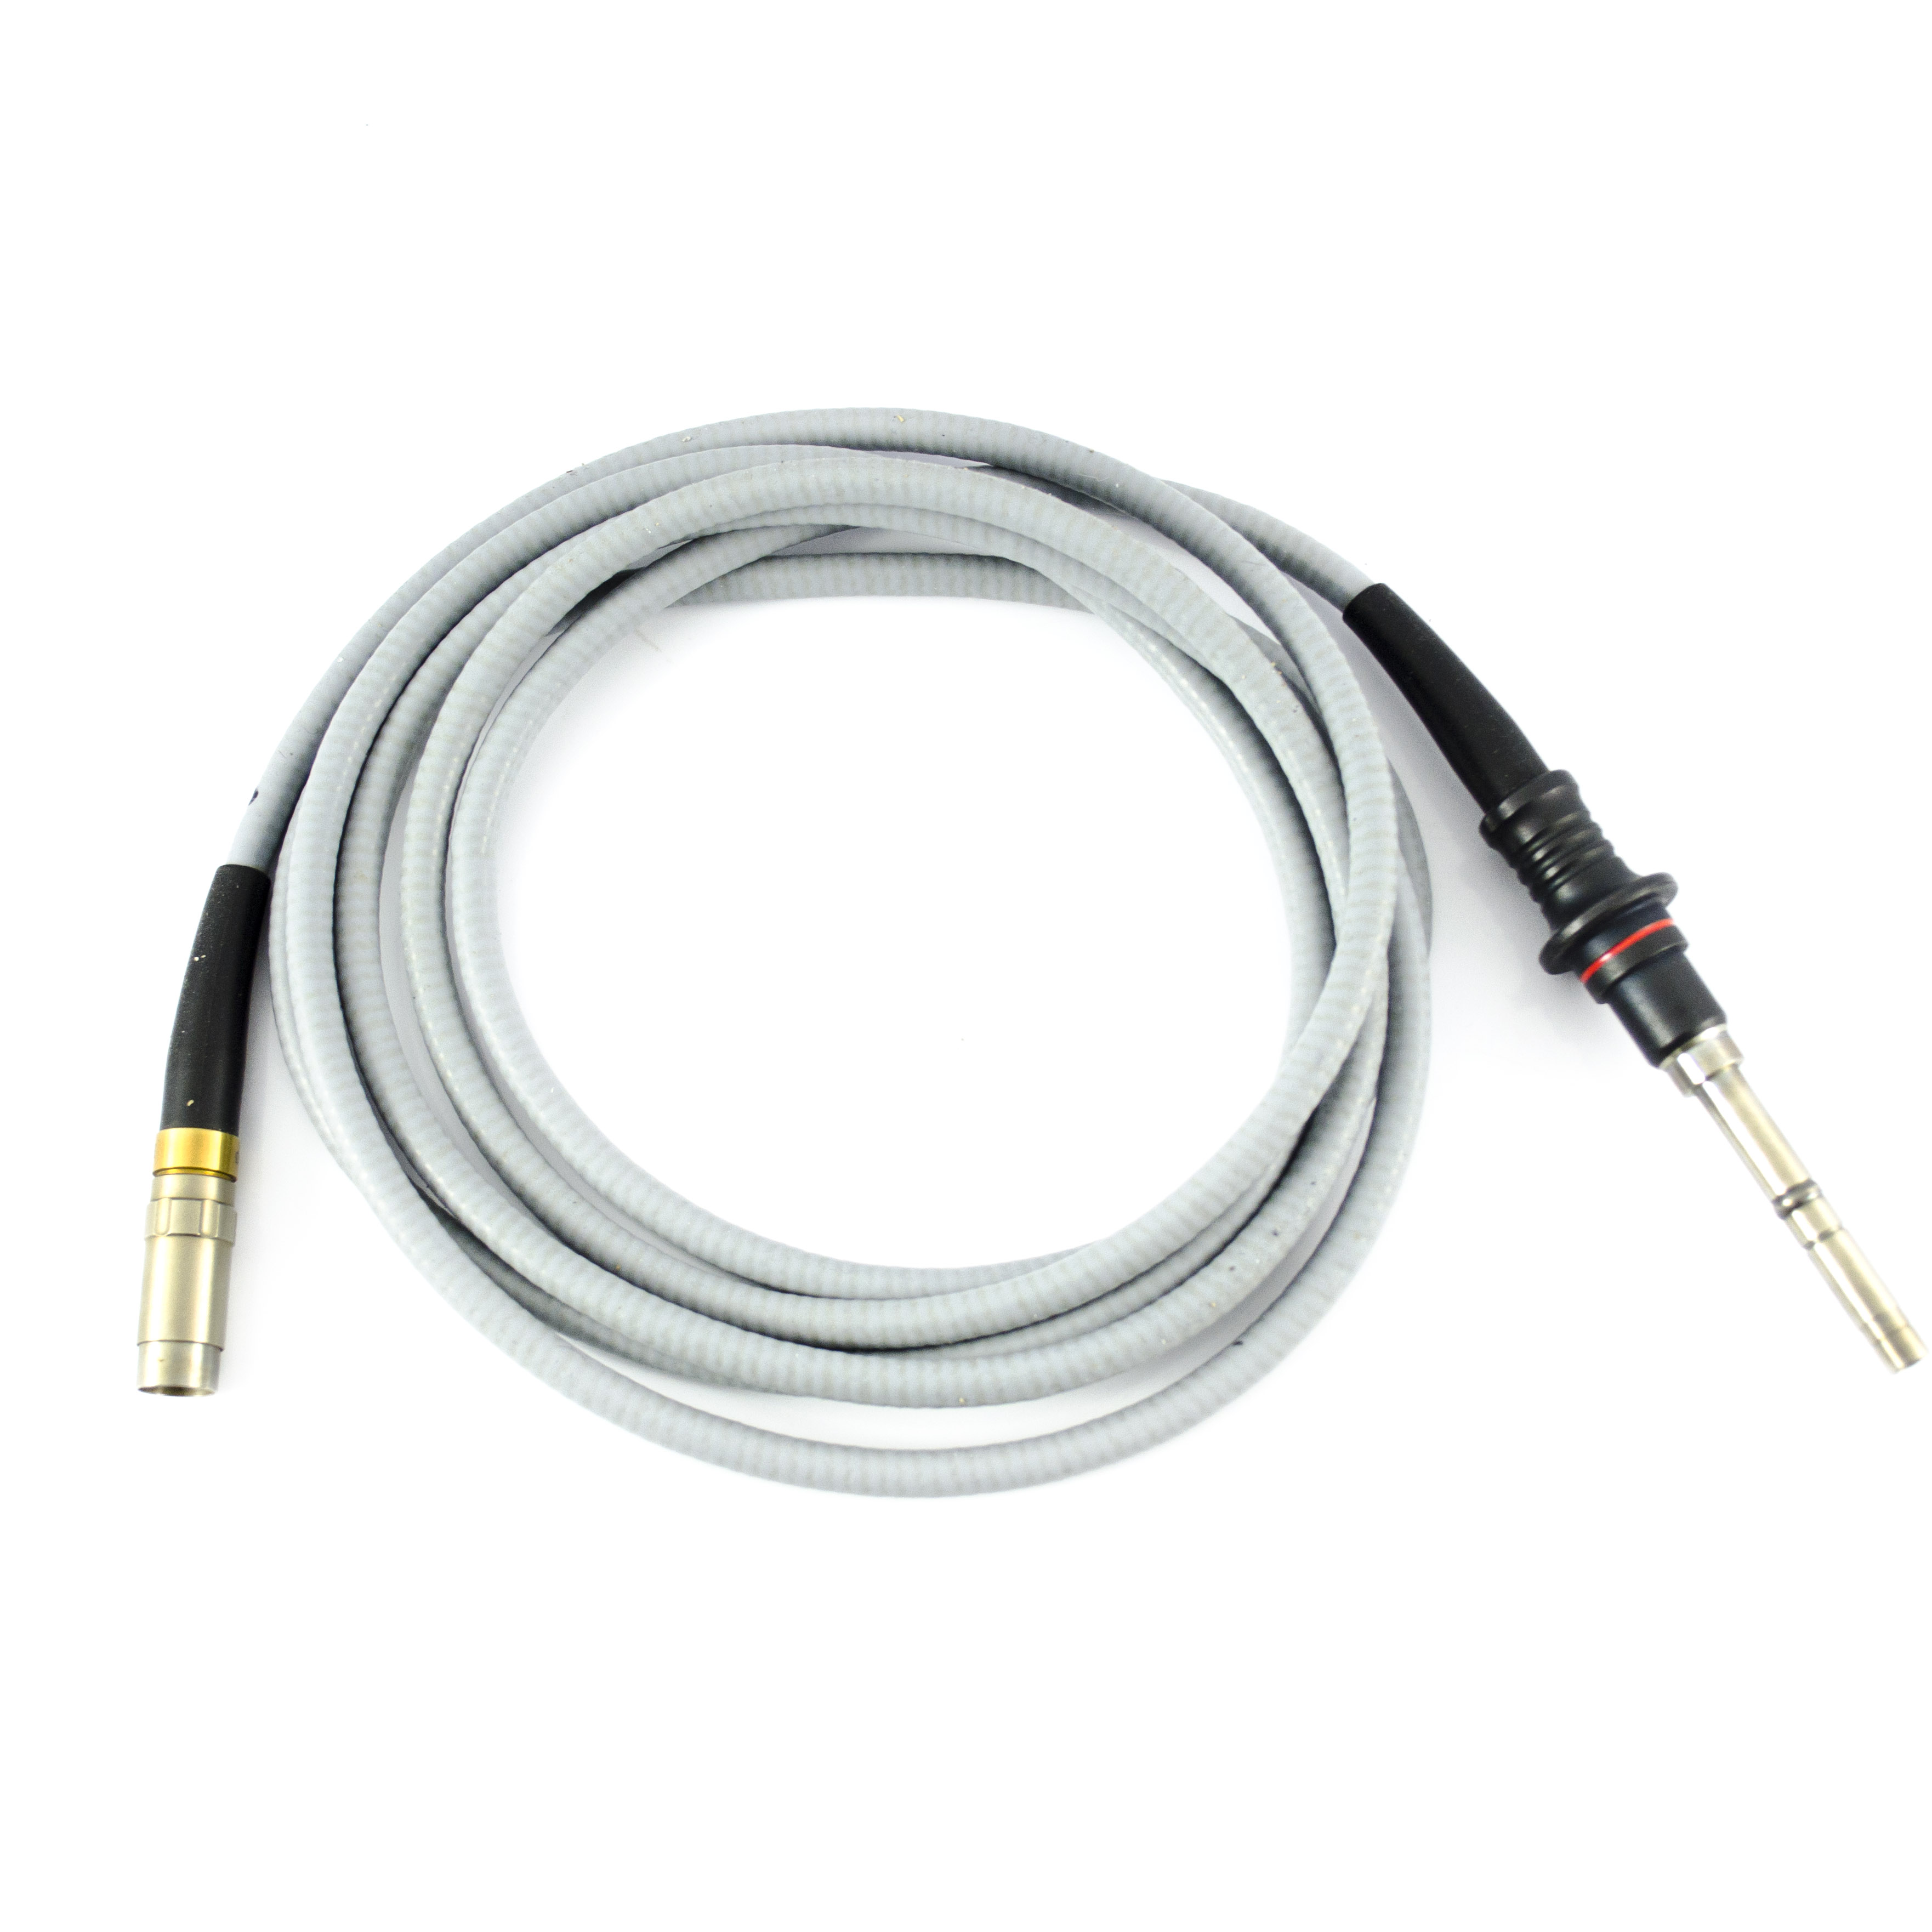 Olympus Fiber Optic Light Guide Cable - A3295